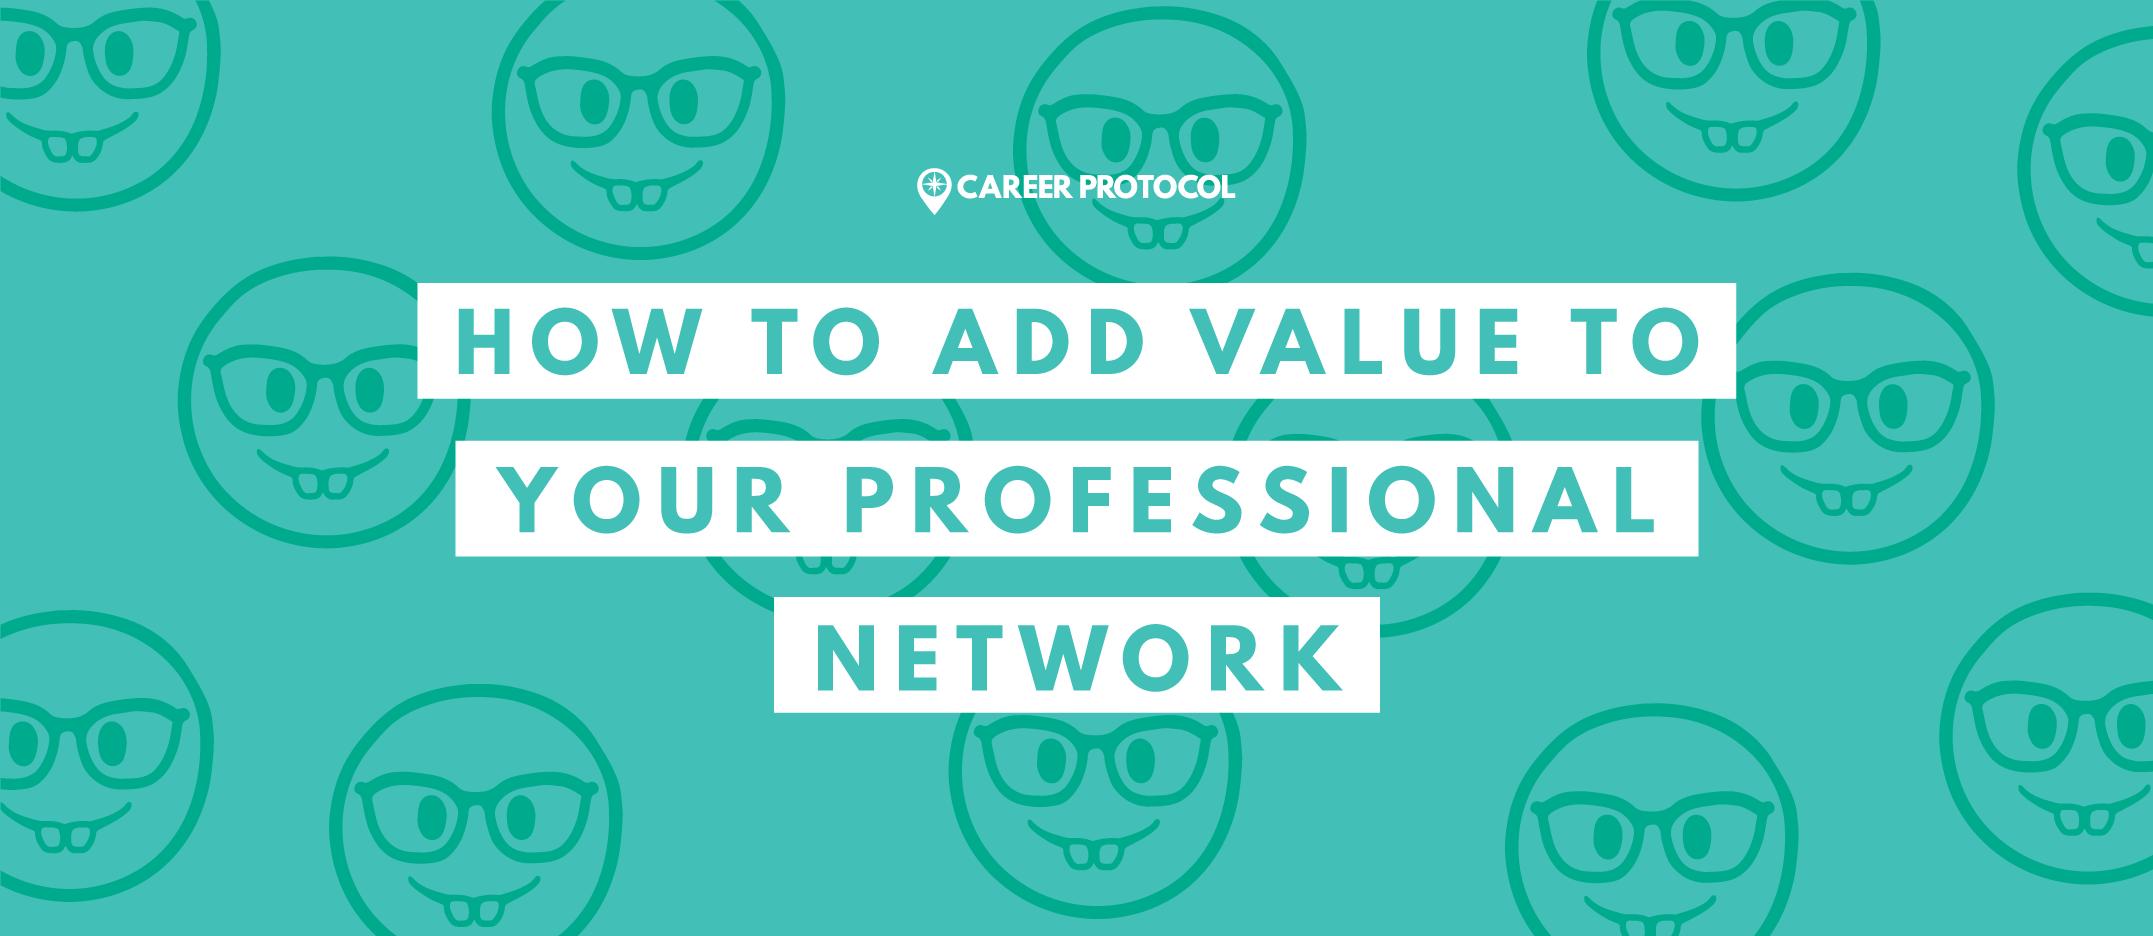 professional networking